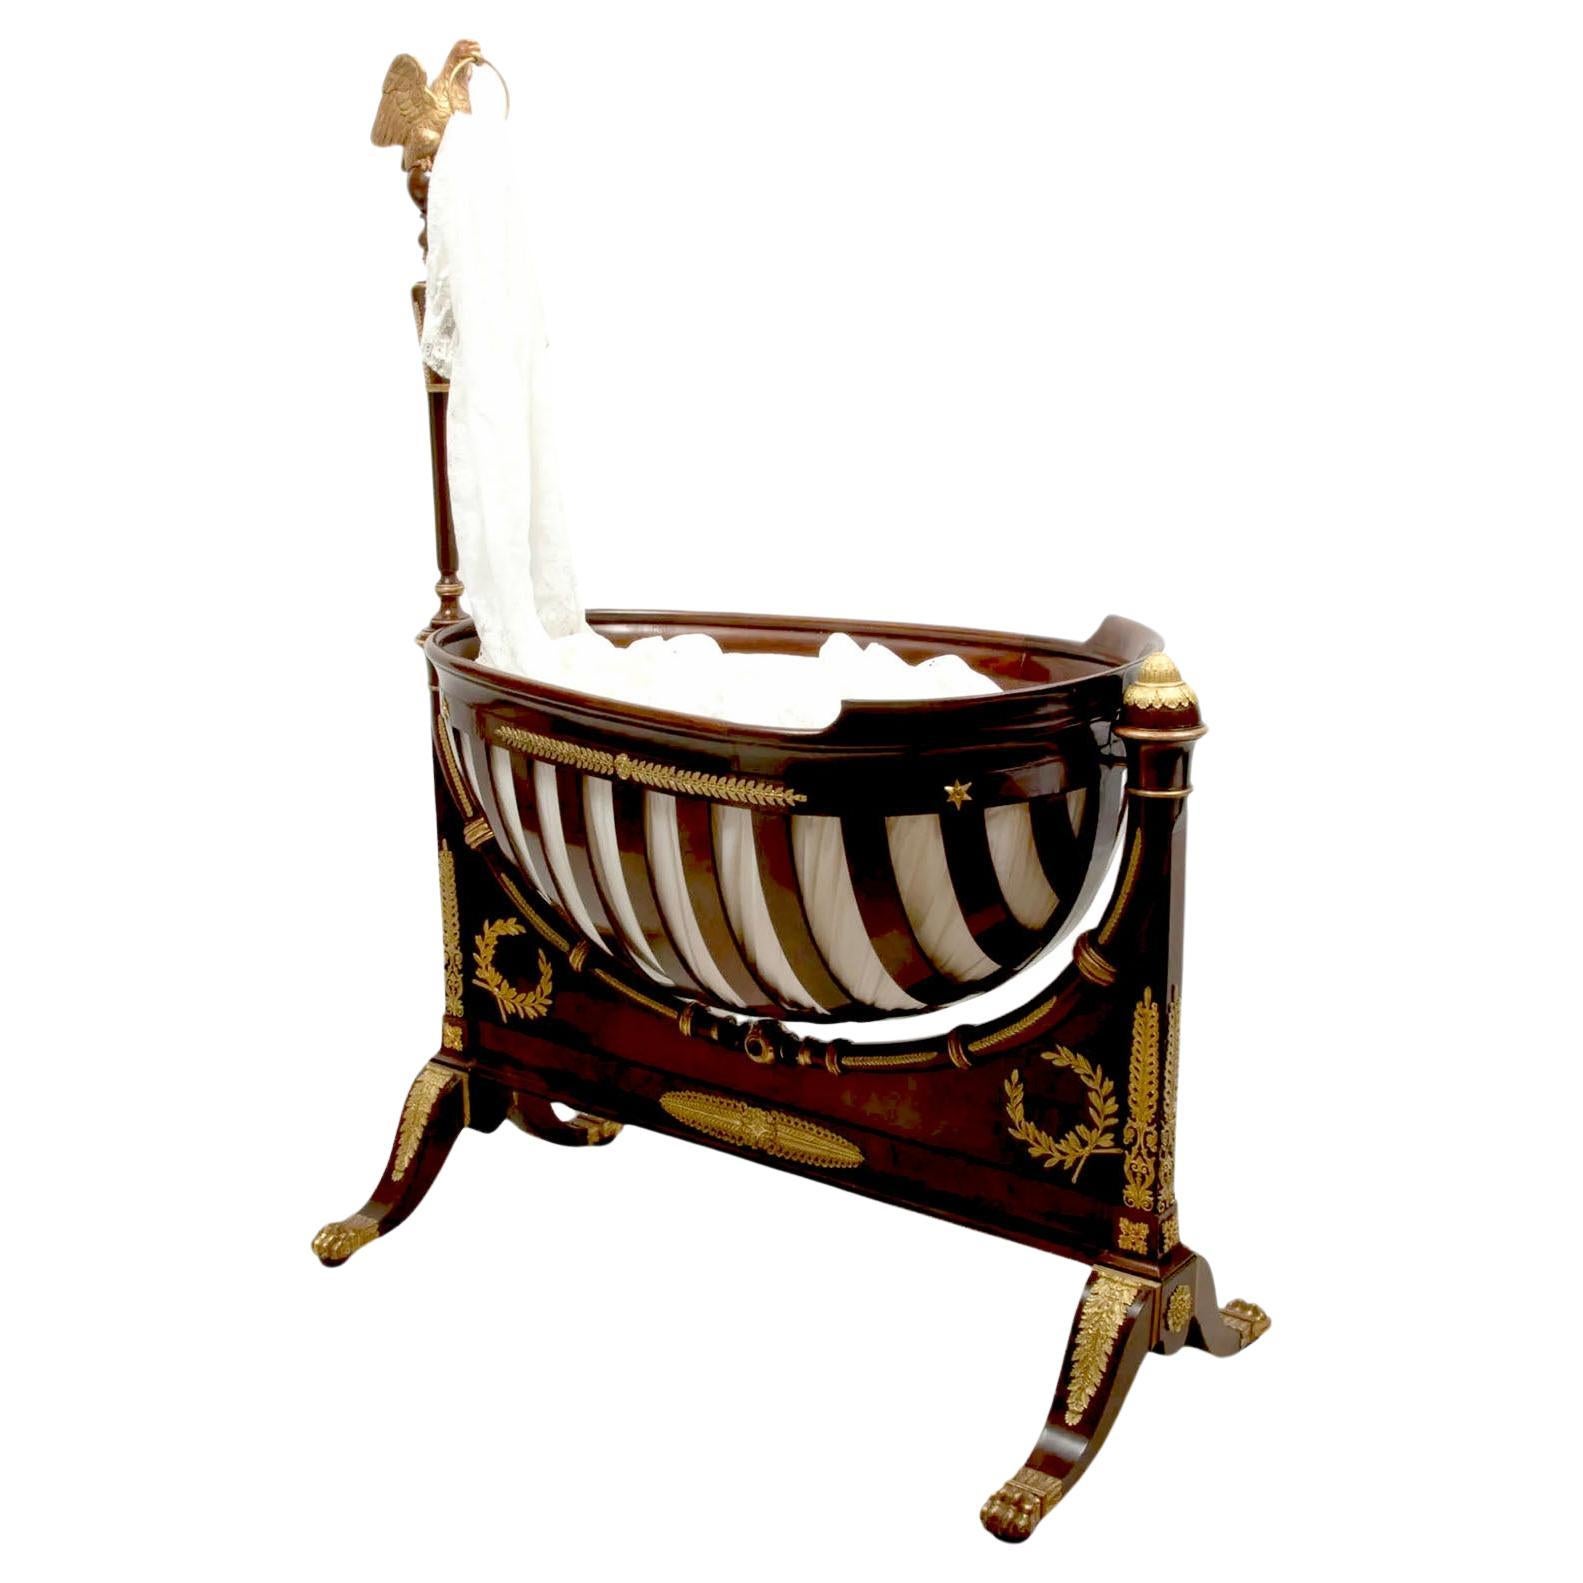 A Fine French 19th Century Empire Style Mahogany and Ormolu Mounted Crib Cradle